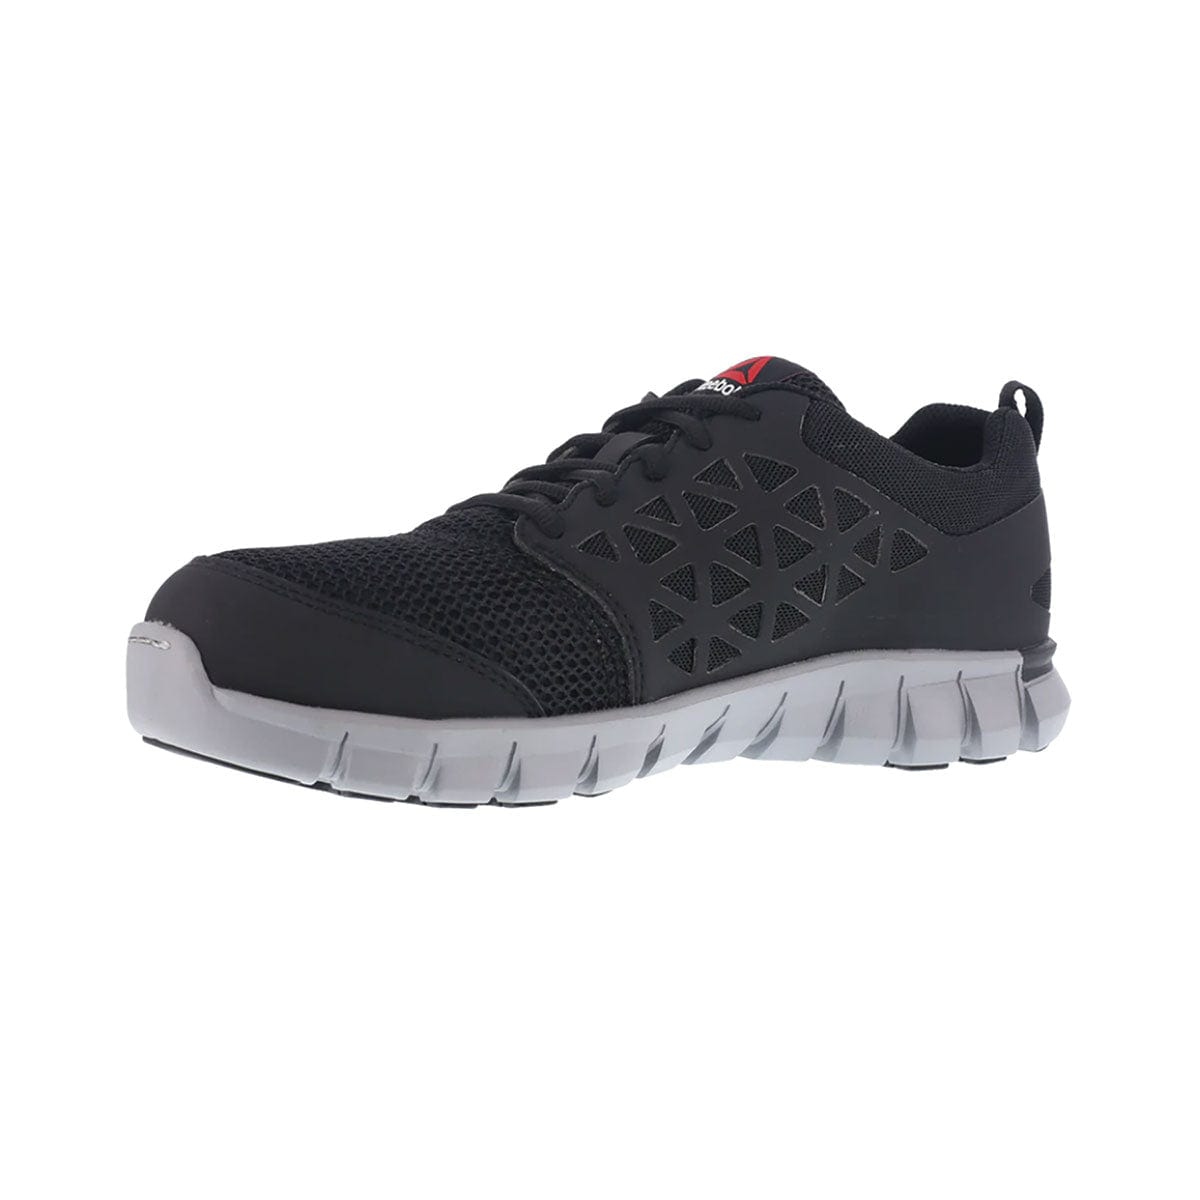 Reebok RB4041 Sublite Cushion EH Alloy Toe Athletic Work Shoes